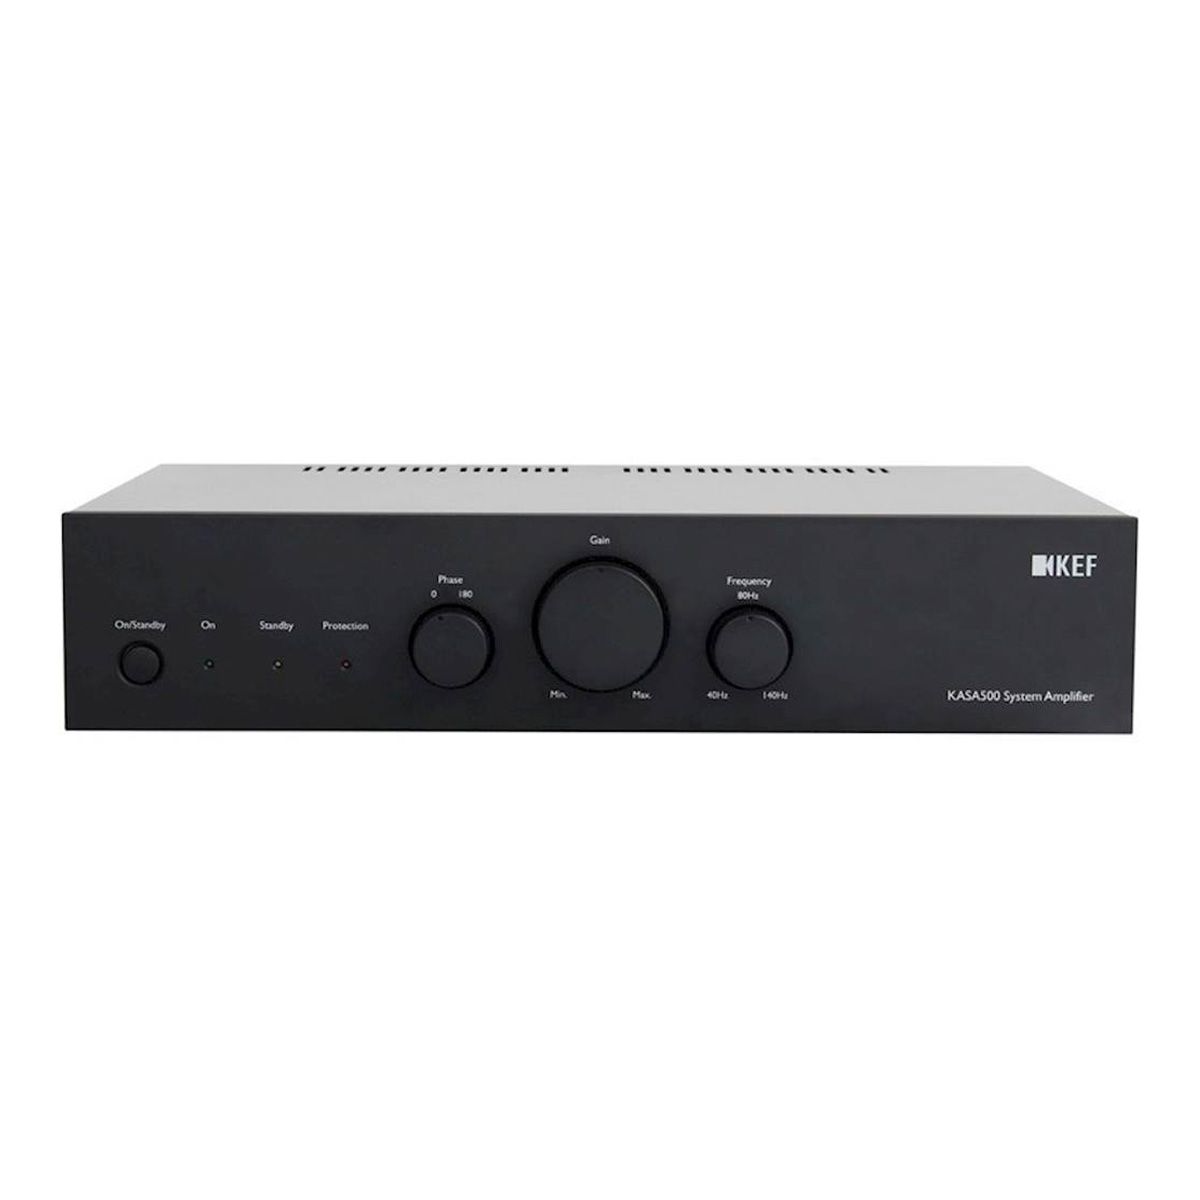 KEF KASA500 DSP Controlled 250W x 2 Systems Amp - Gray 2U Rack Ears Included - Each - front view